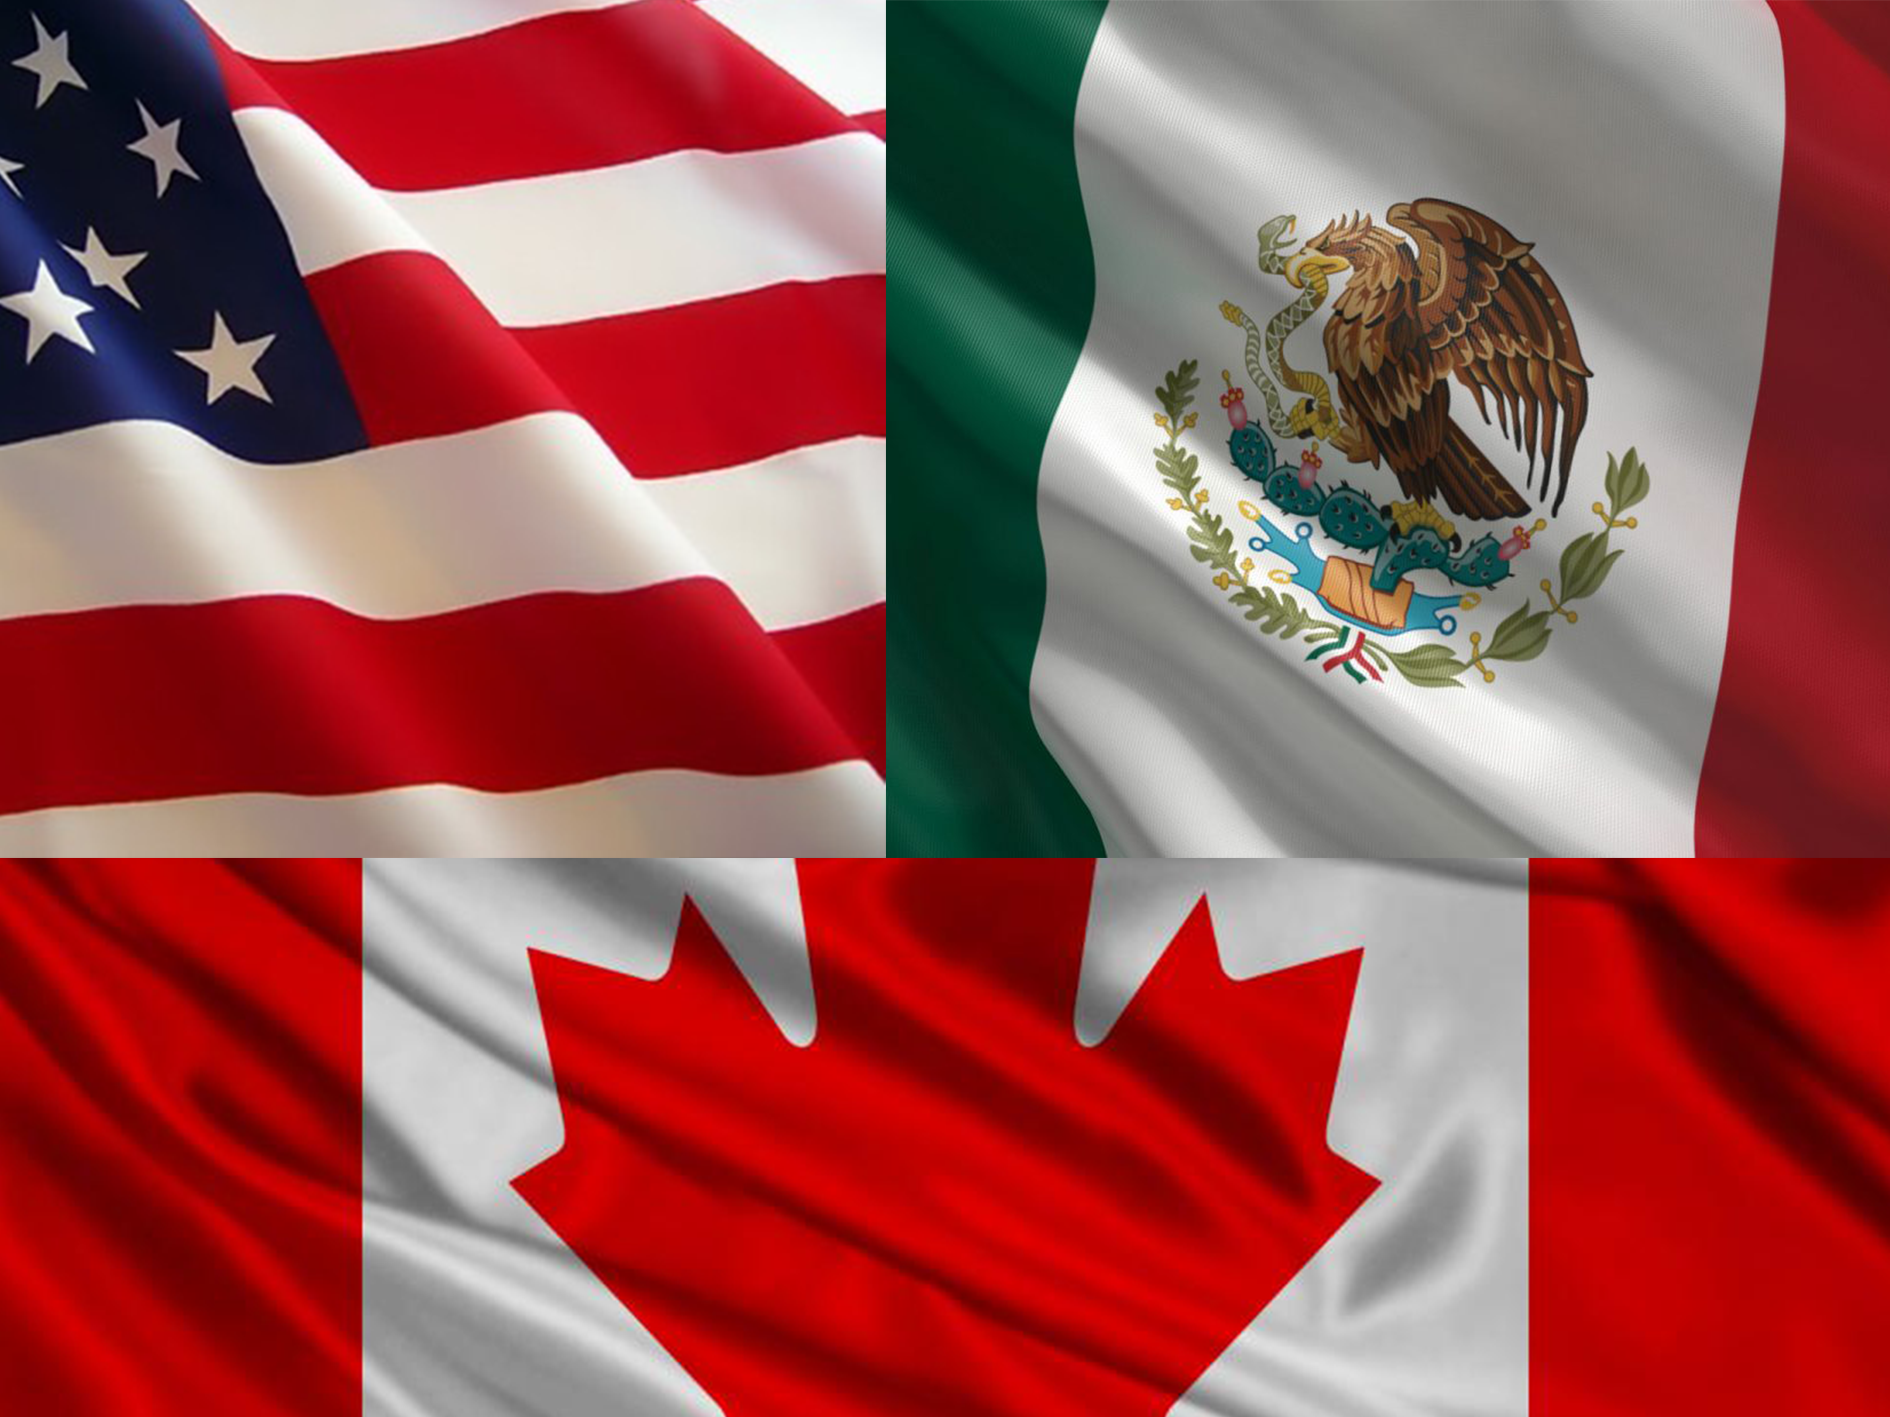 USMCA approval could double trade